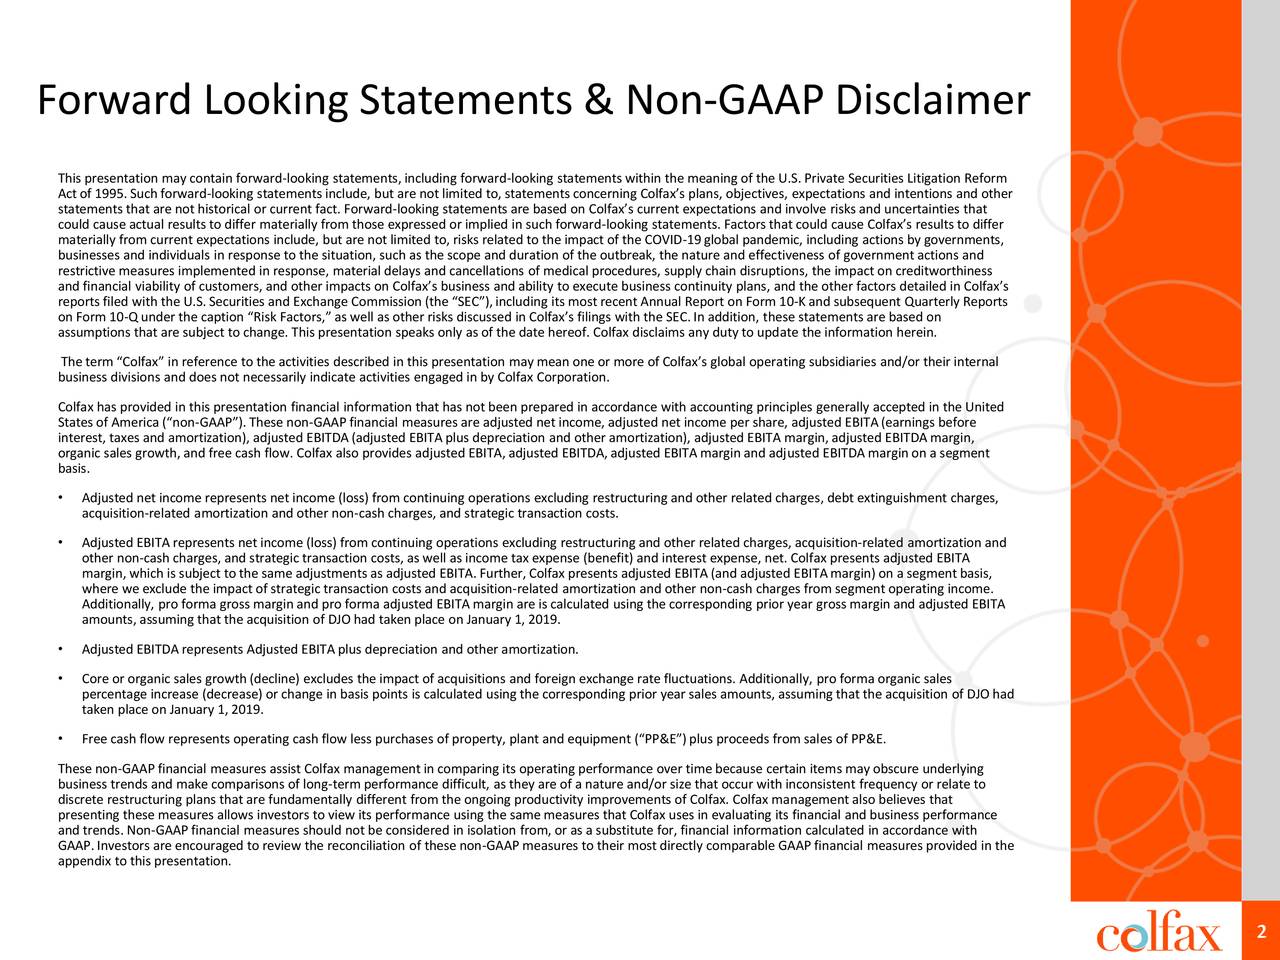 Forward Looking Statements & Non-GAAP Disclaimer